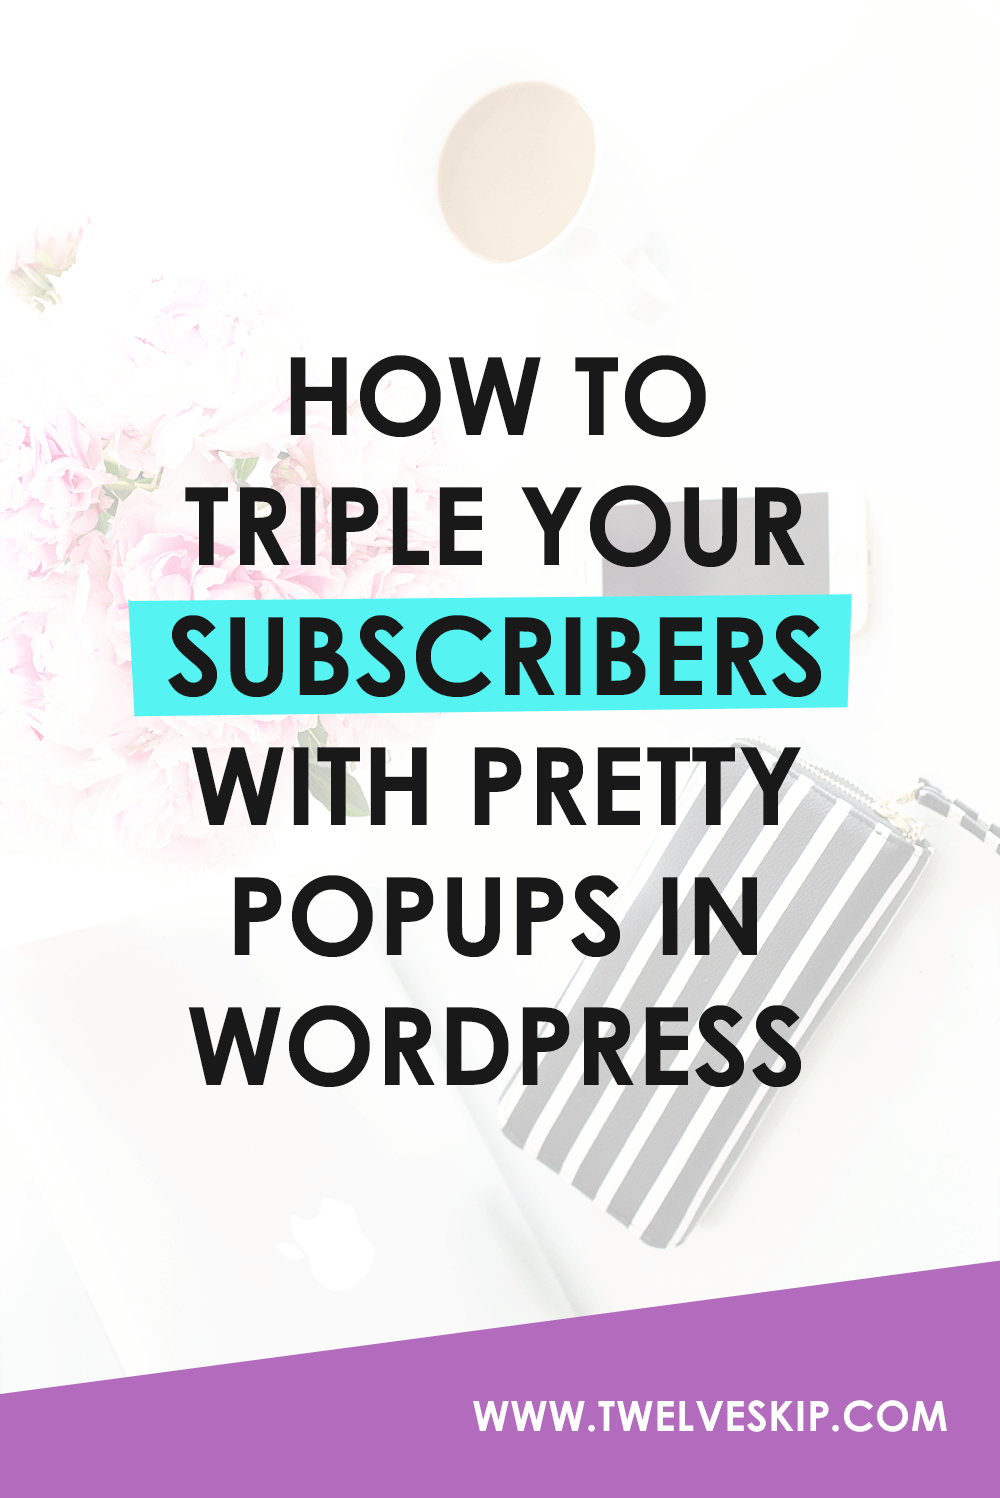 How To Triple Your Subscribers With Pretty Popups in WordPress